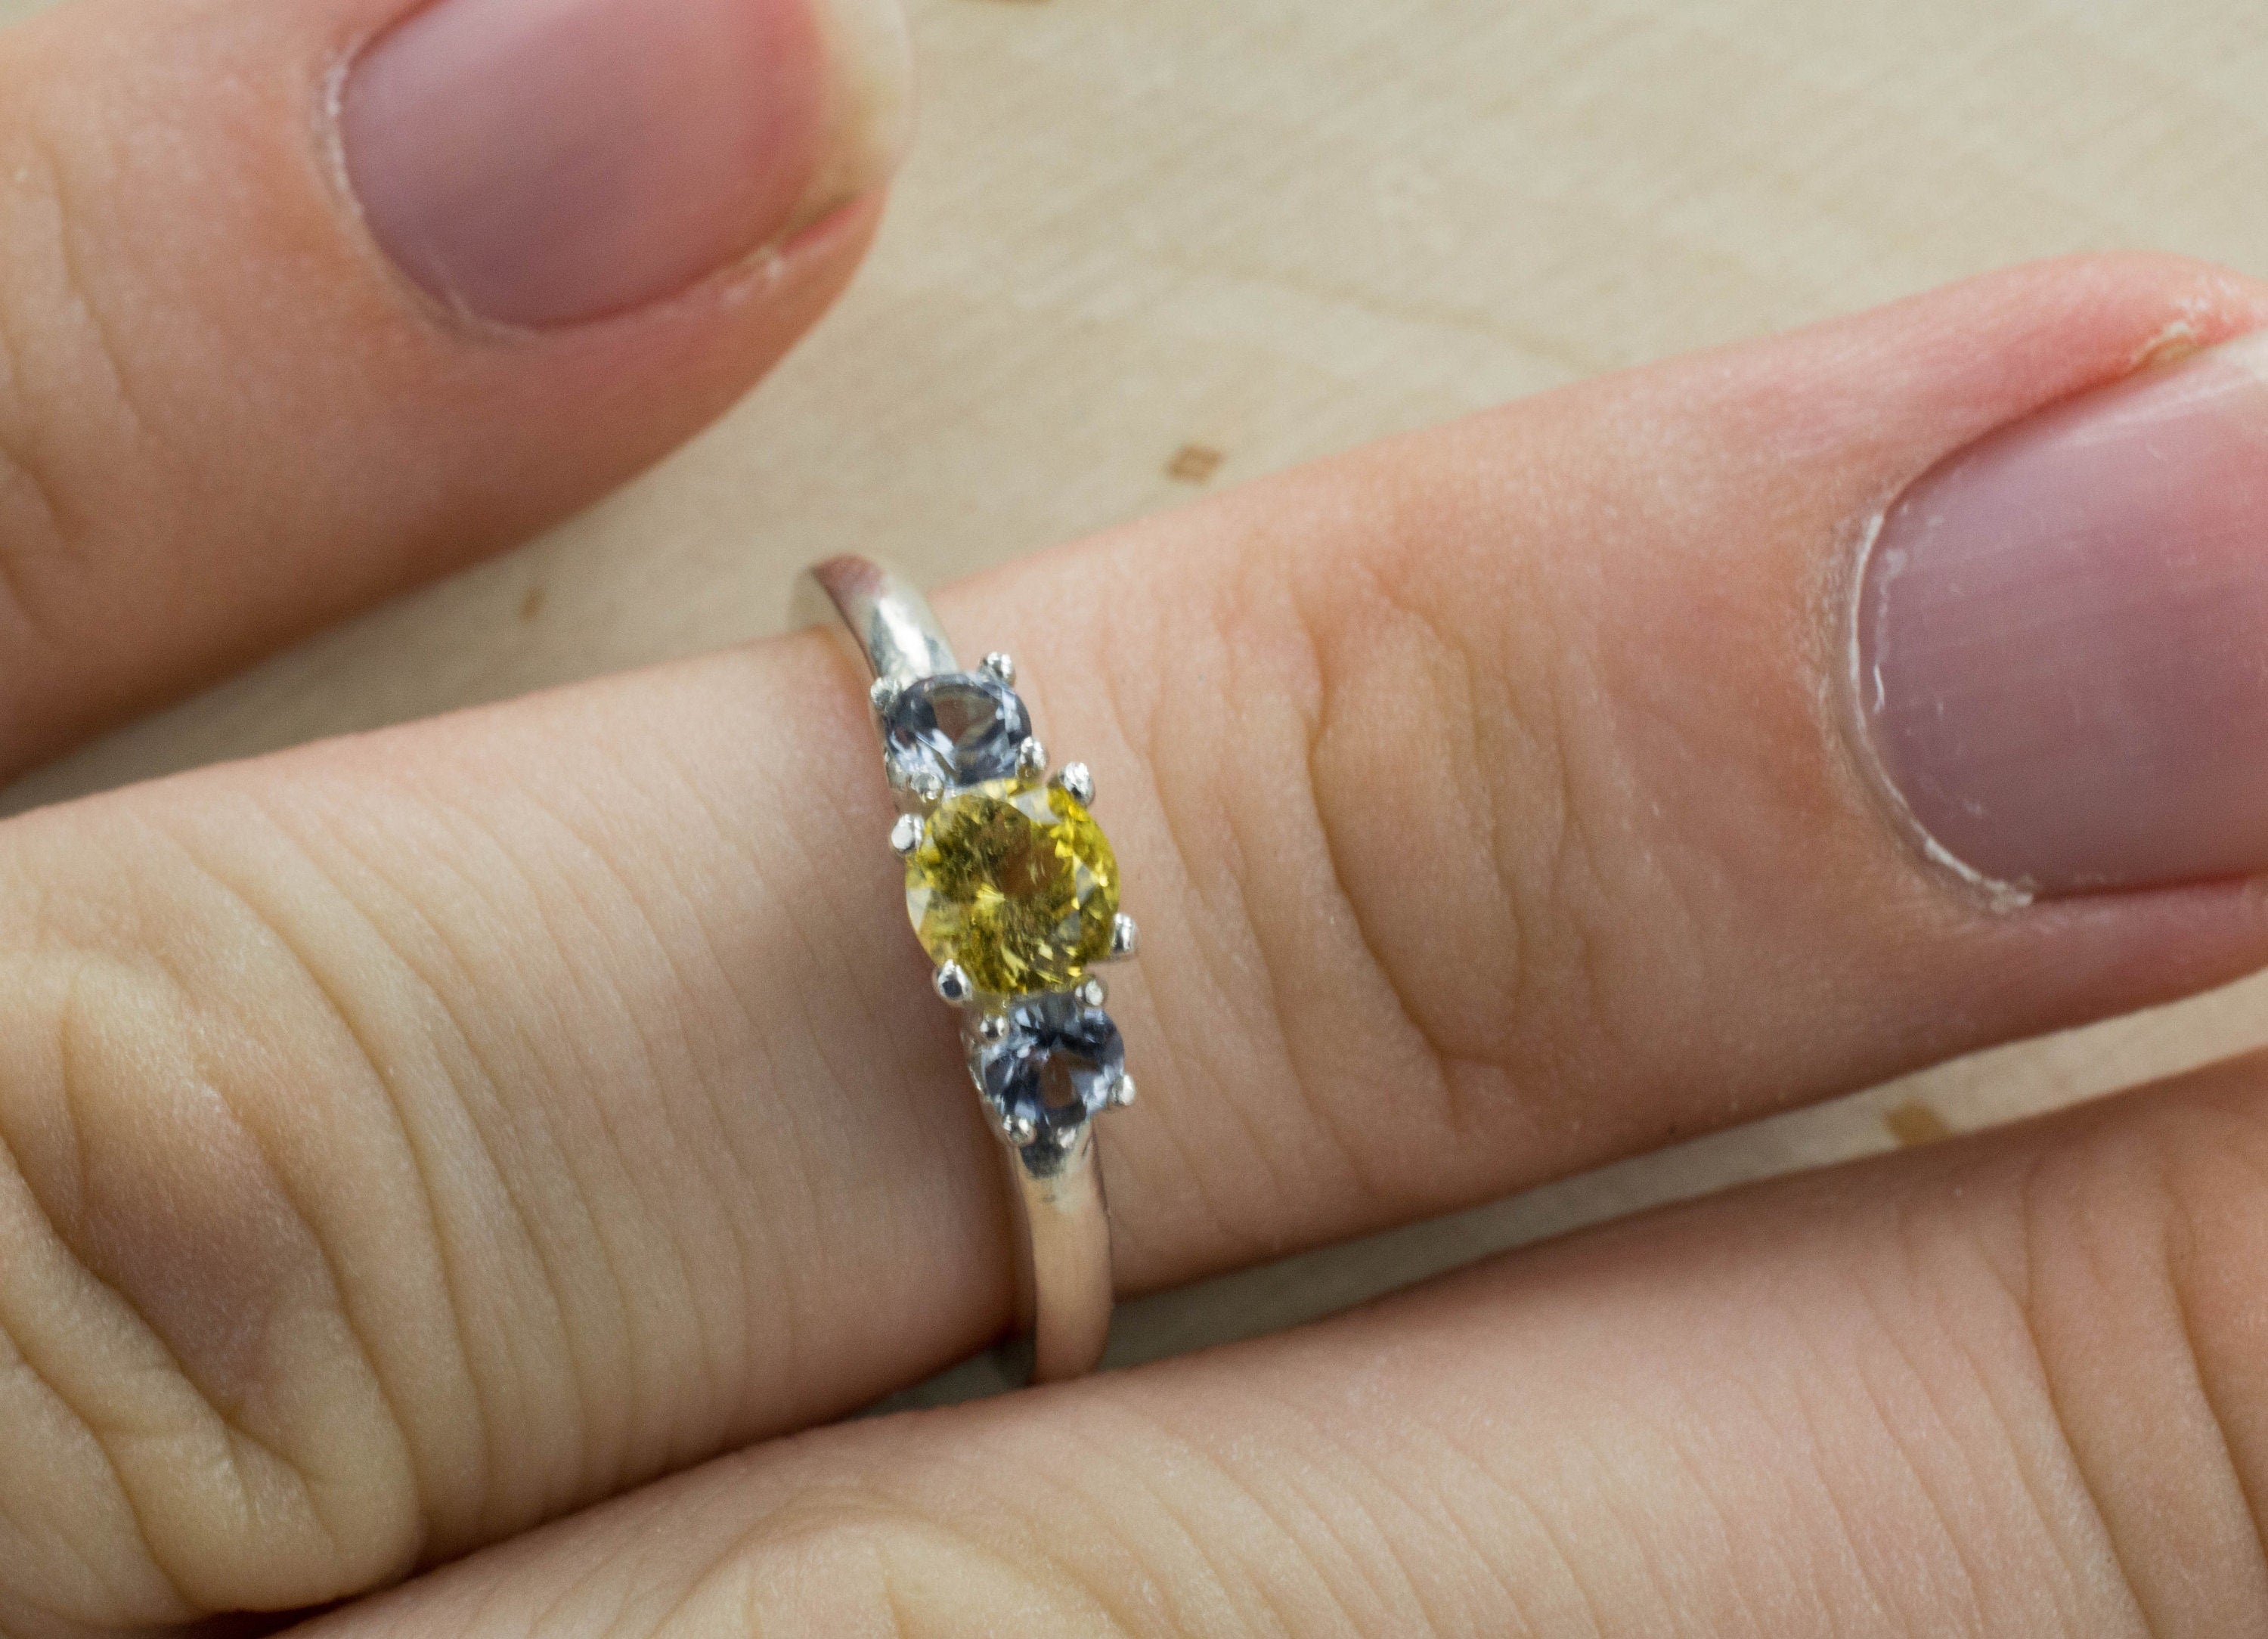 Yellow Tourmaline and Gray Spinel Sterling Silver Ring, Genuine Untreated Tourmaline and Spinel; Gray Spinel Ring; Tourmaline Ring - Mark Oliver Gems